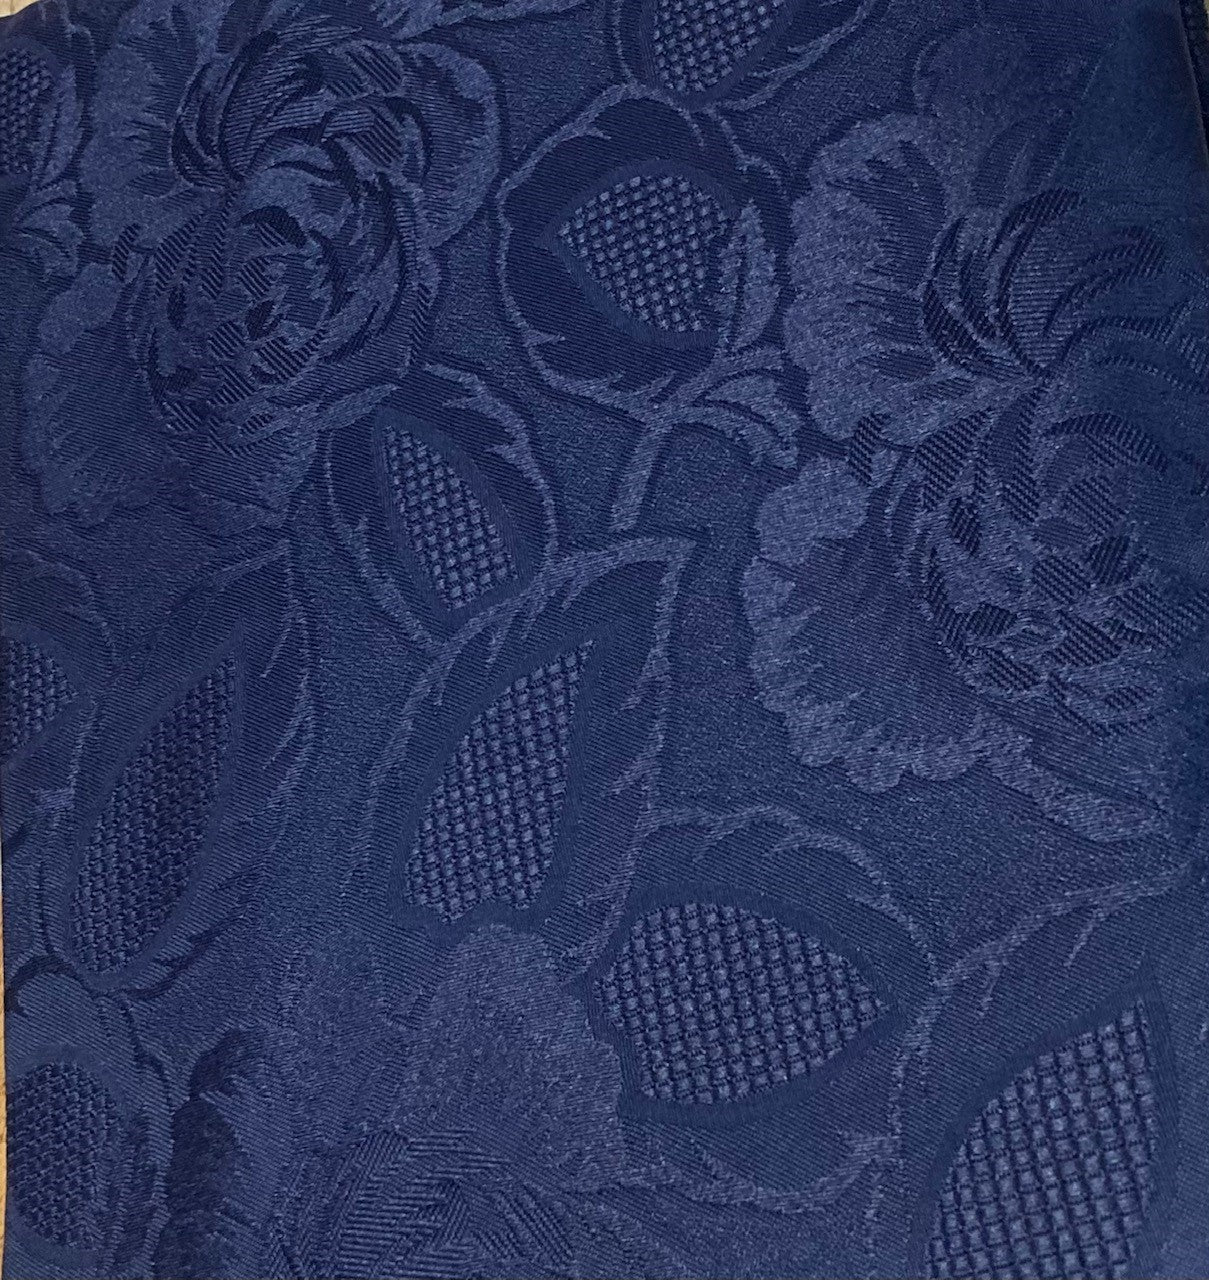 Rose Jacquard Floral 70" x 90" Oval Tablecloth Woven Jacquard Navy